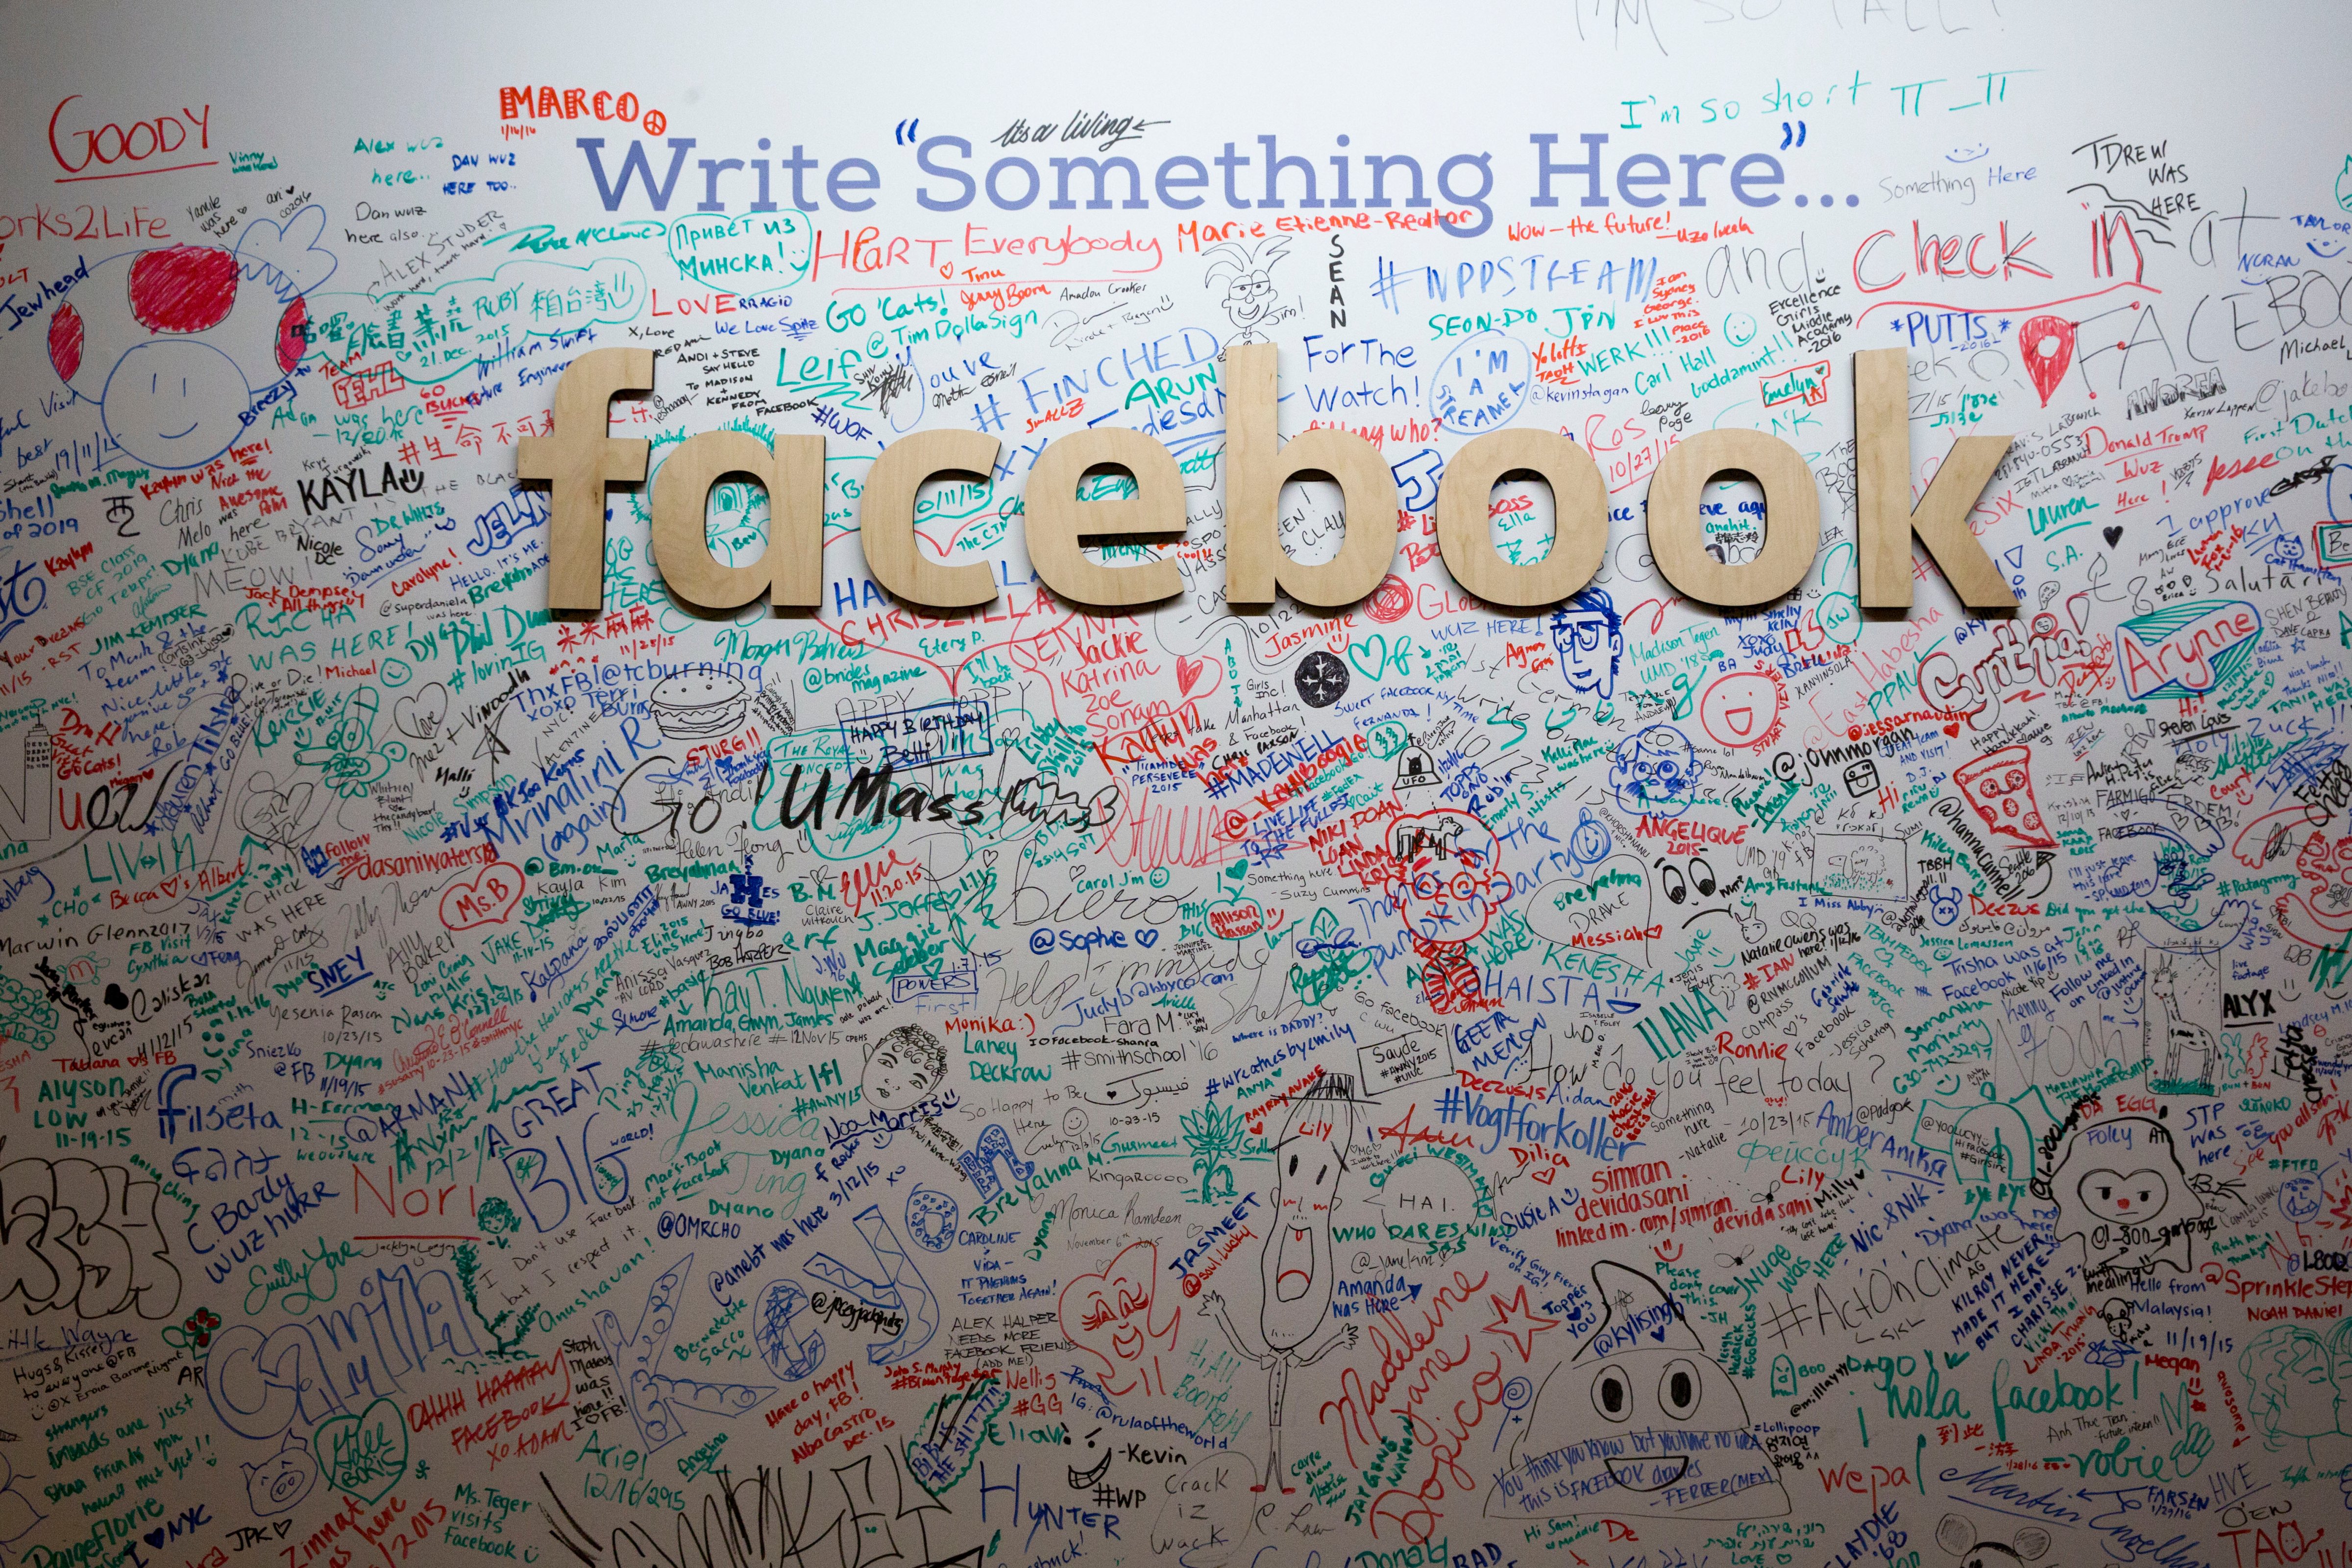 A signature wall at Facebook's New York office, photographed Feb. 18. (Mary Altaffer—AP)